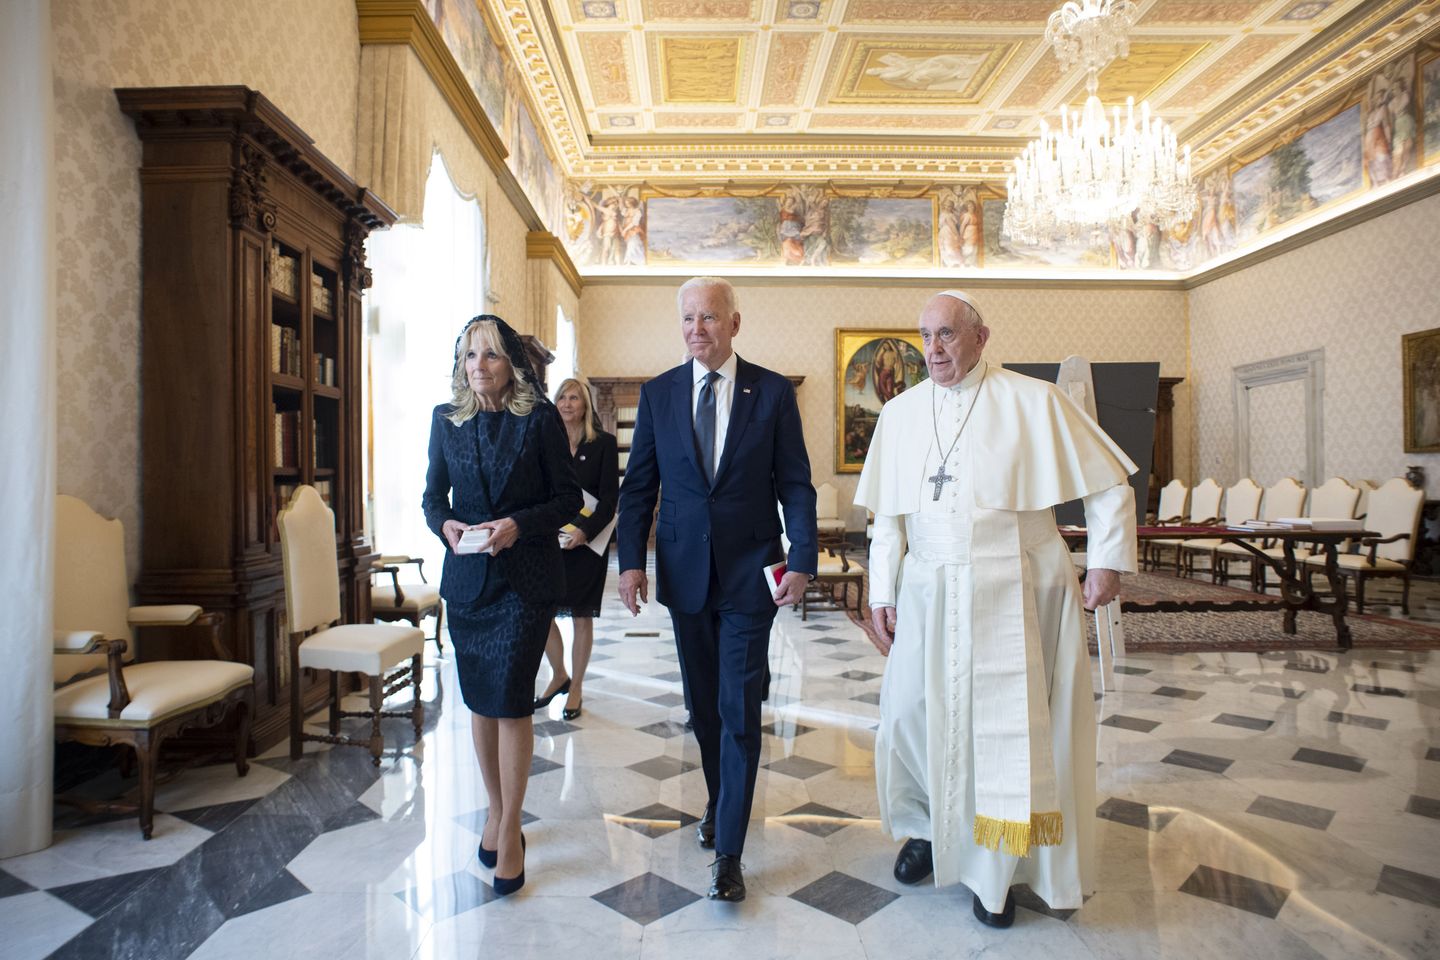 Biden says Pope Francis told him to keep receiving communion